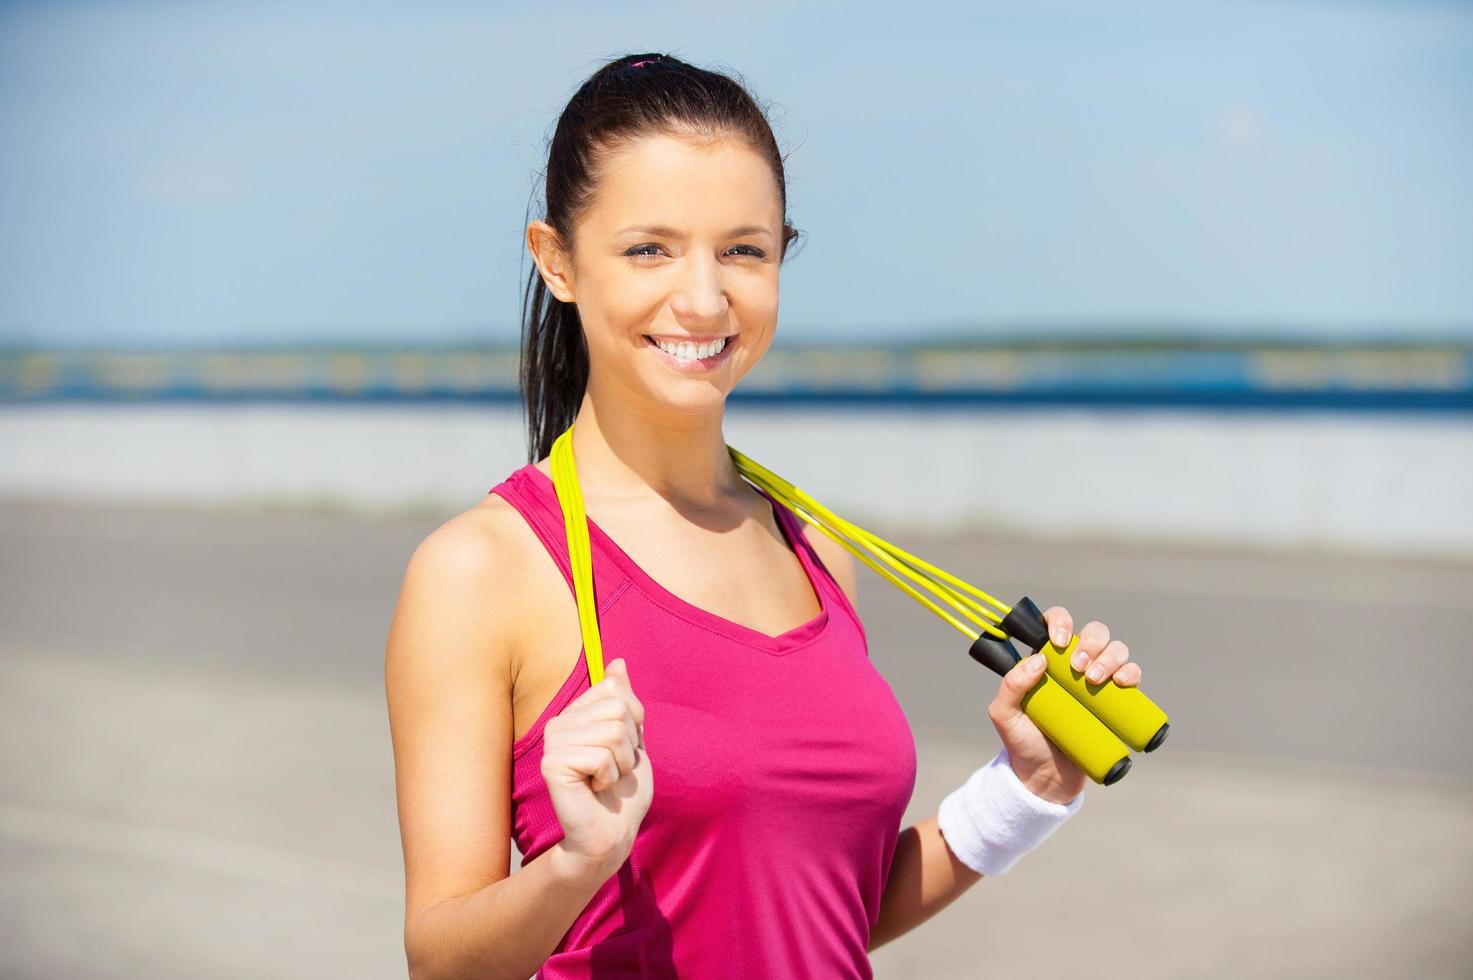 Beauty with jumping rope. Full length of beautiful young woman in sports clothing holding jumping rope and smiling while standing outdoors photo